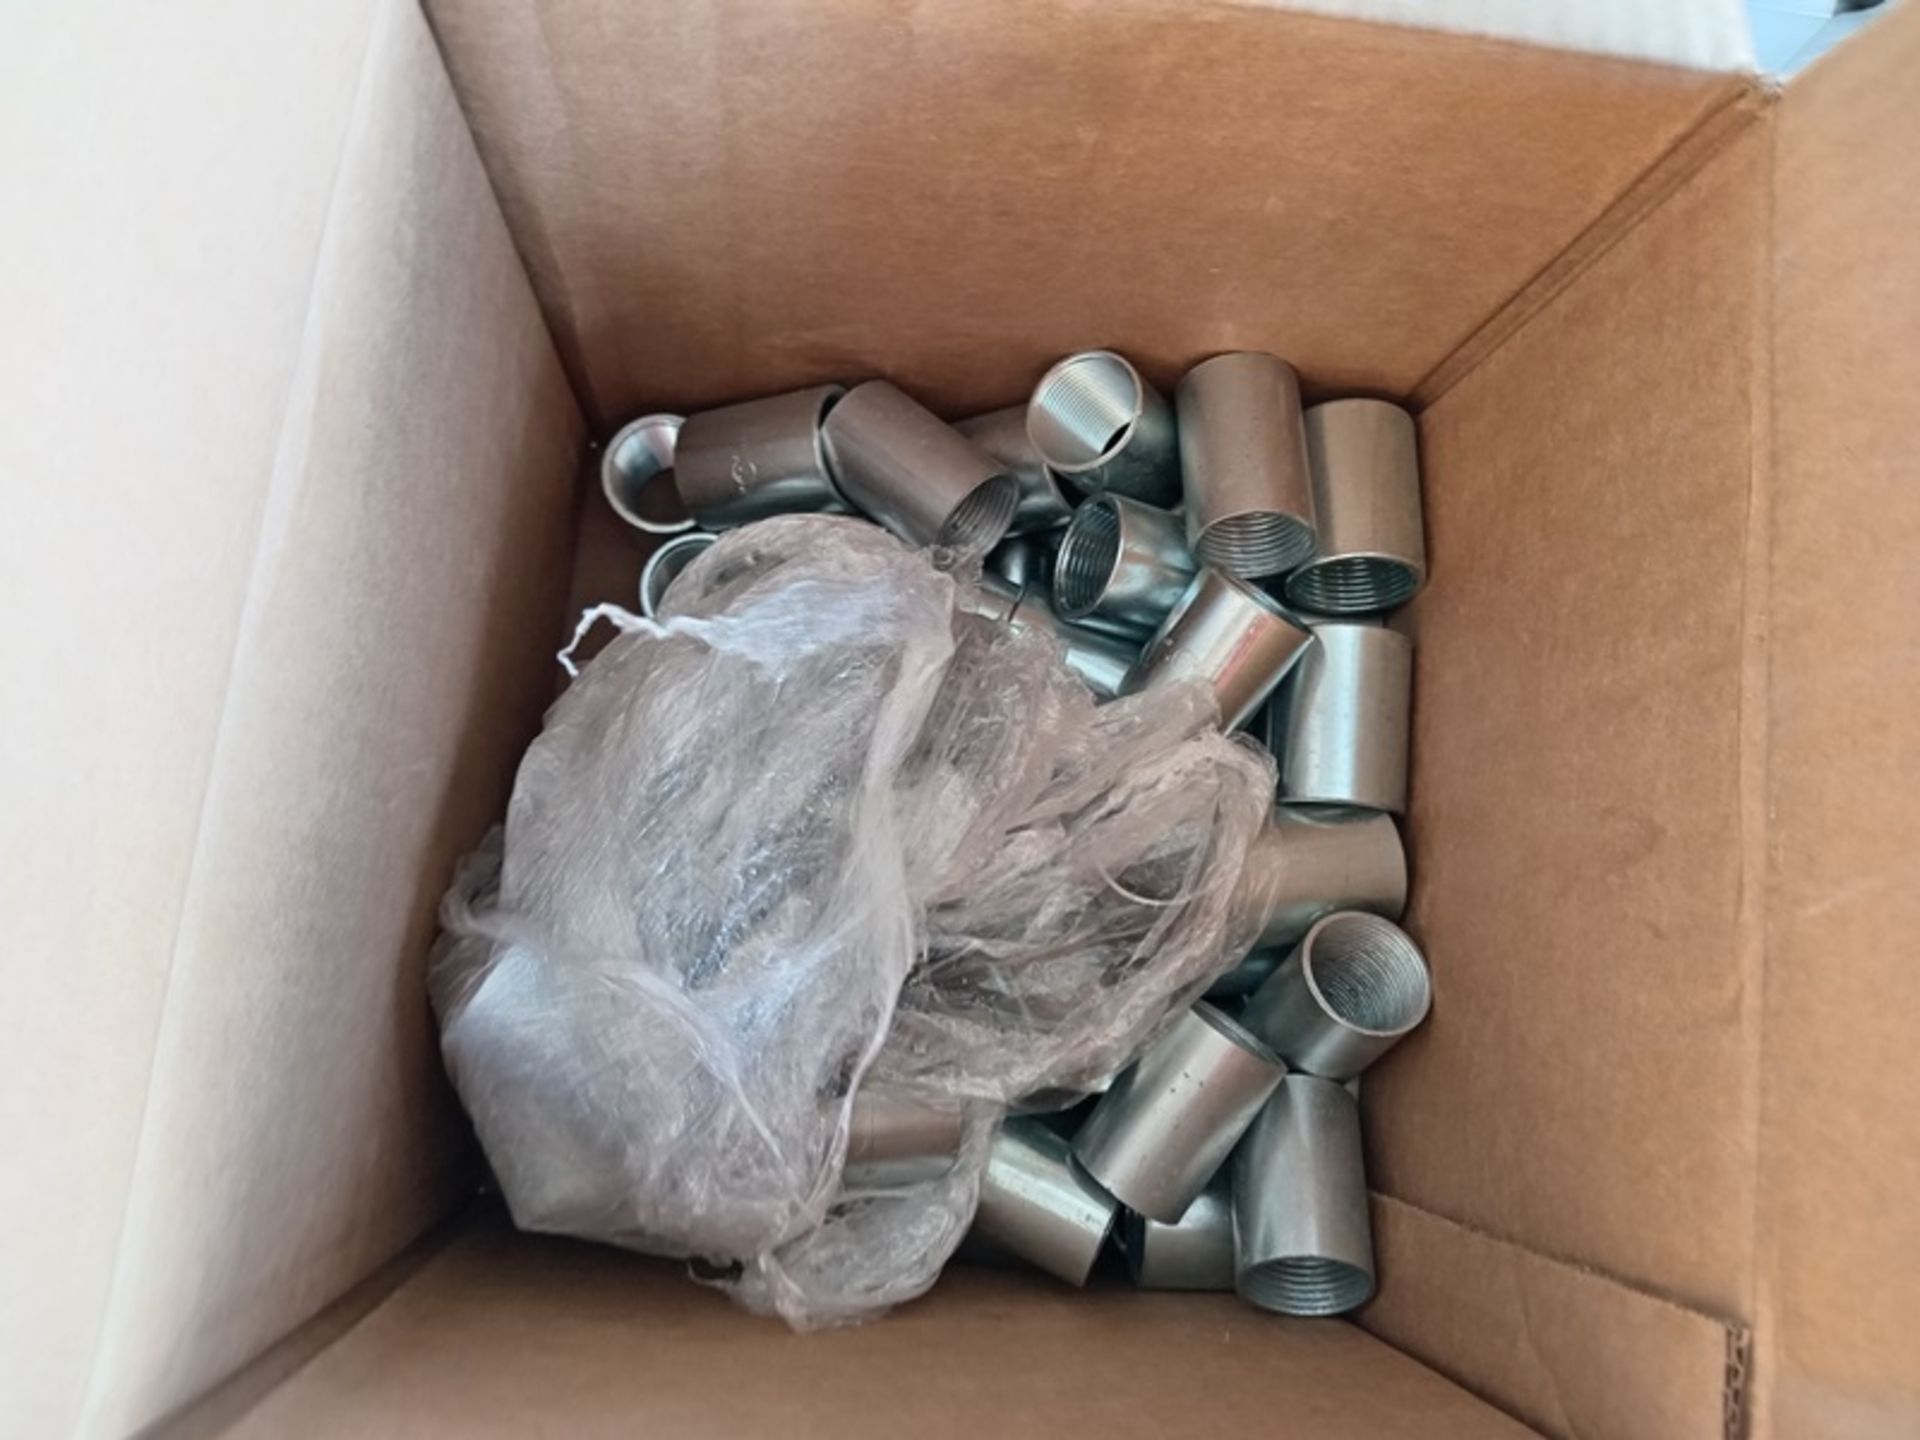 LOT OF (1,684) PIECES OF GALVANIZED STEEL UNION COUPLINGS - Image 5 of 7